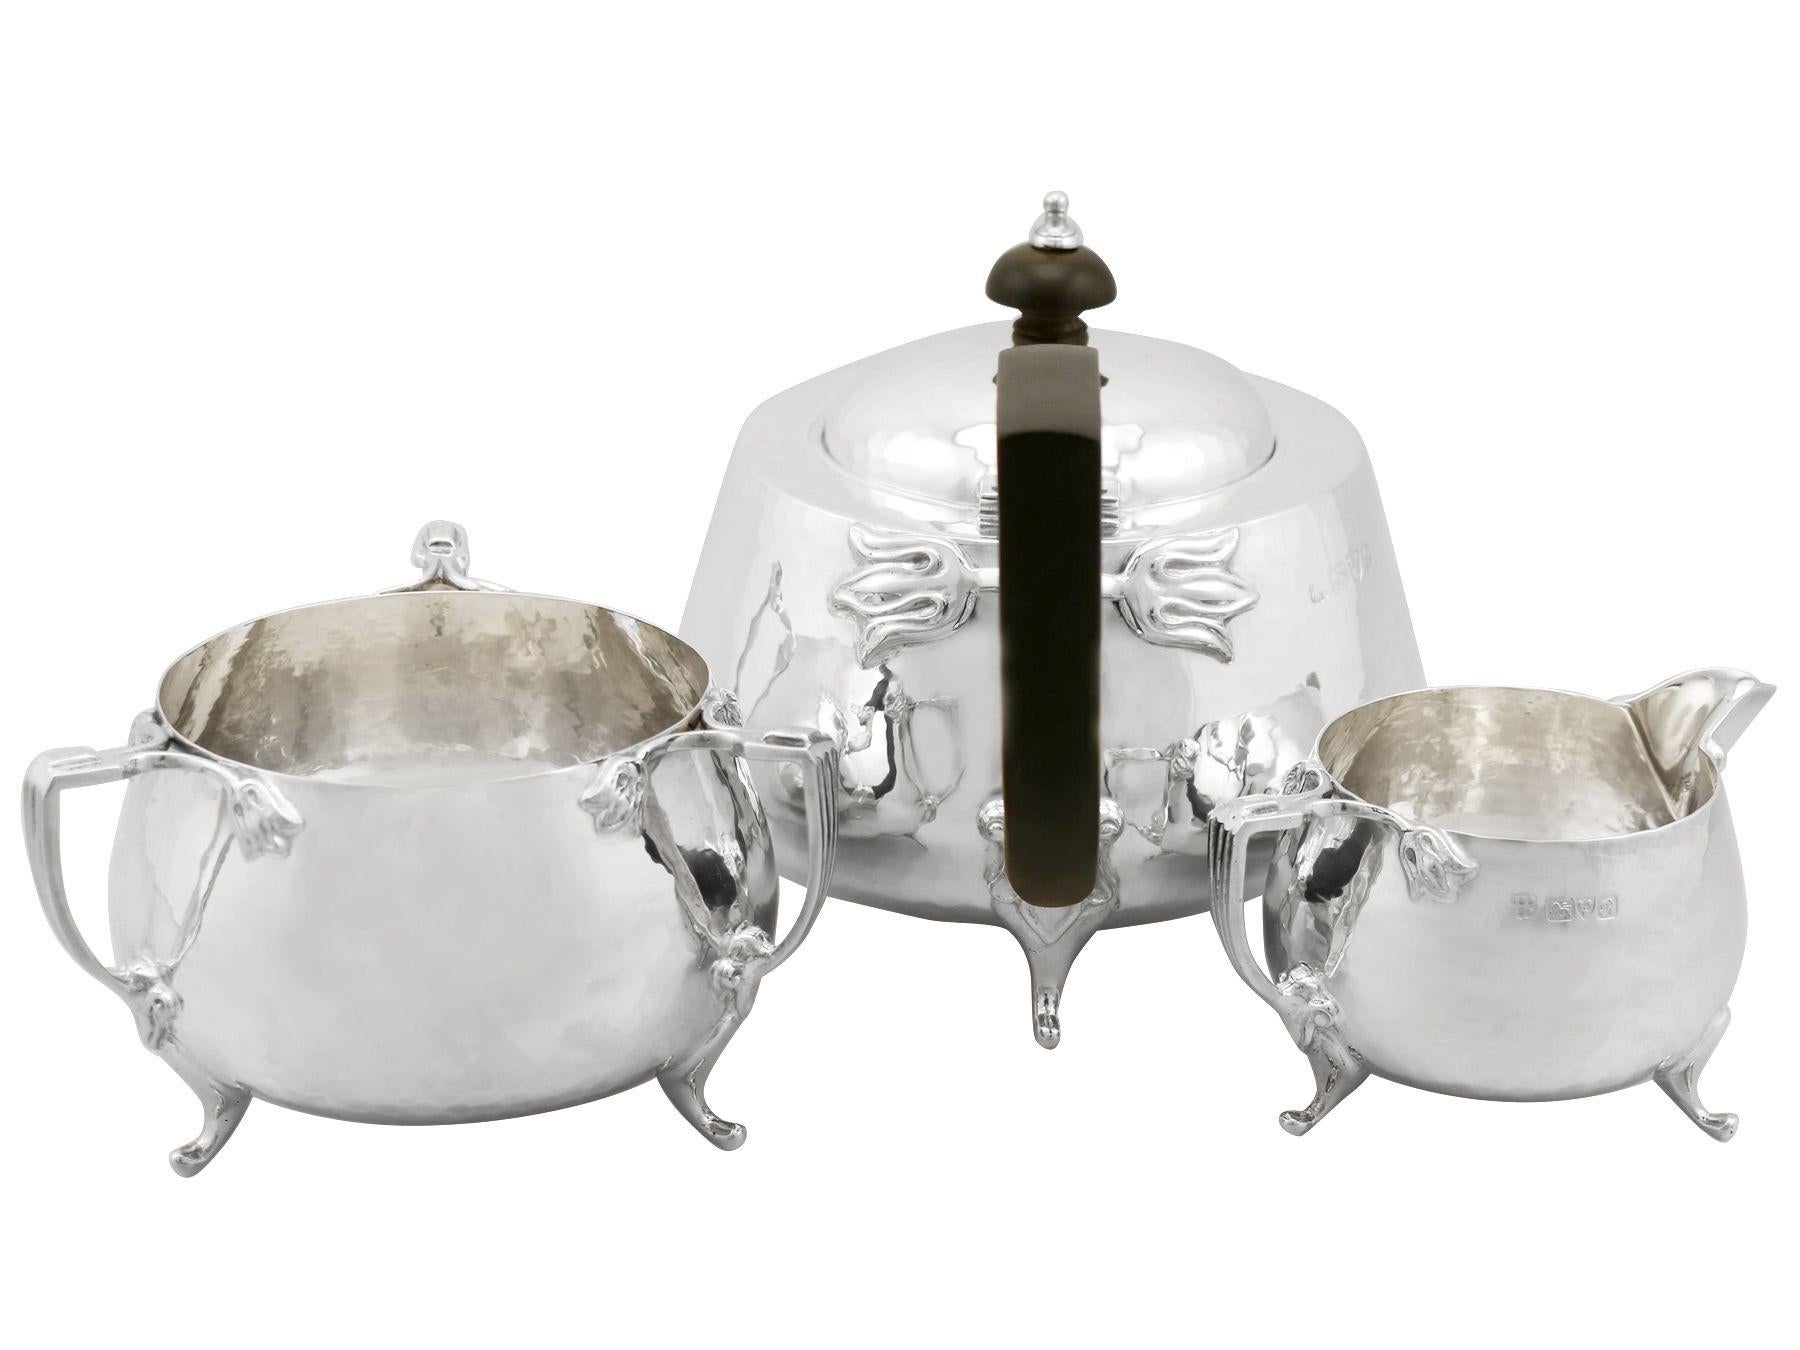 A fine and impressive antique George V English sterling silver three-piece tea service in the Art Nouveau style; an addition to our antique teaware collection.

This fine antique George V sterling silver three-piece tea set/service consists of a